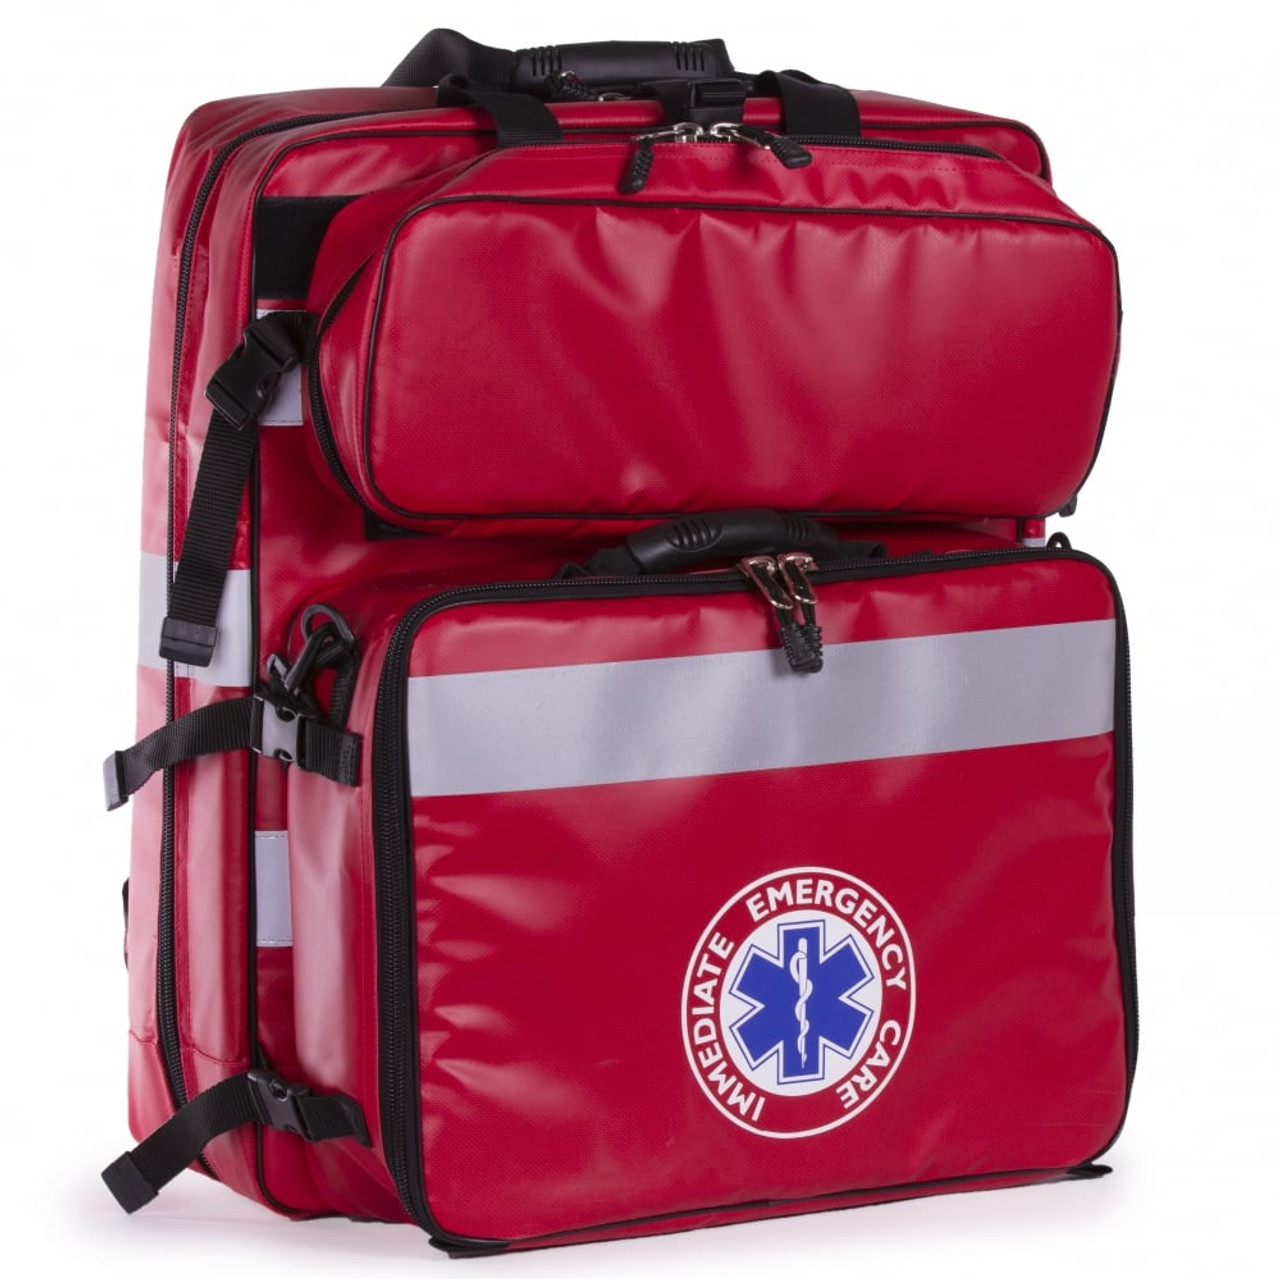 Embroidered PHARMACY Red Natural Reiseapotheke Emergency Bag